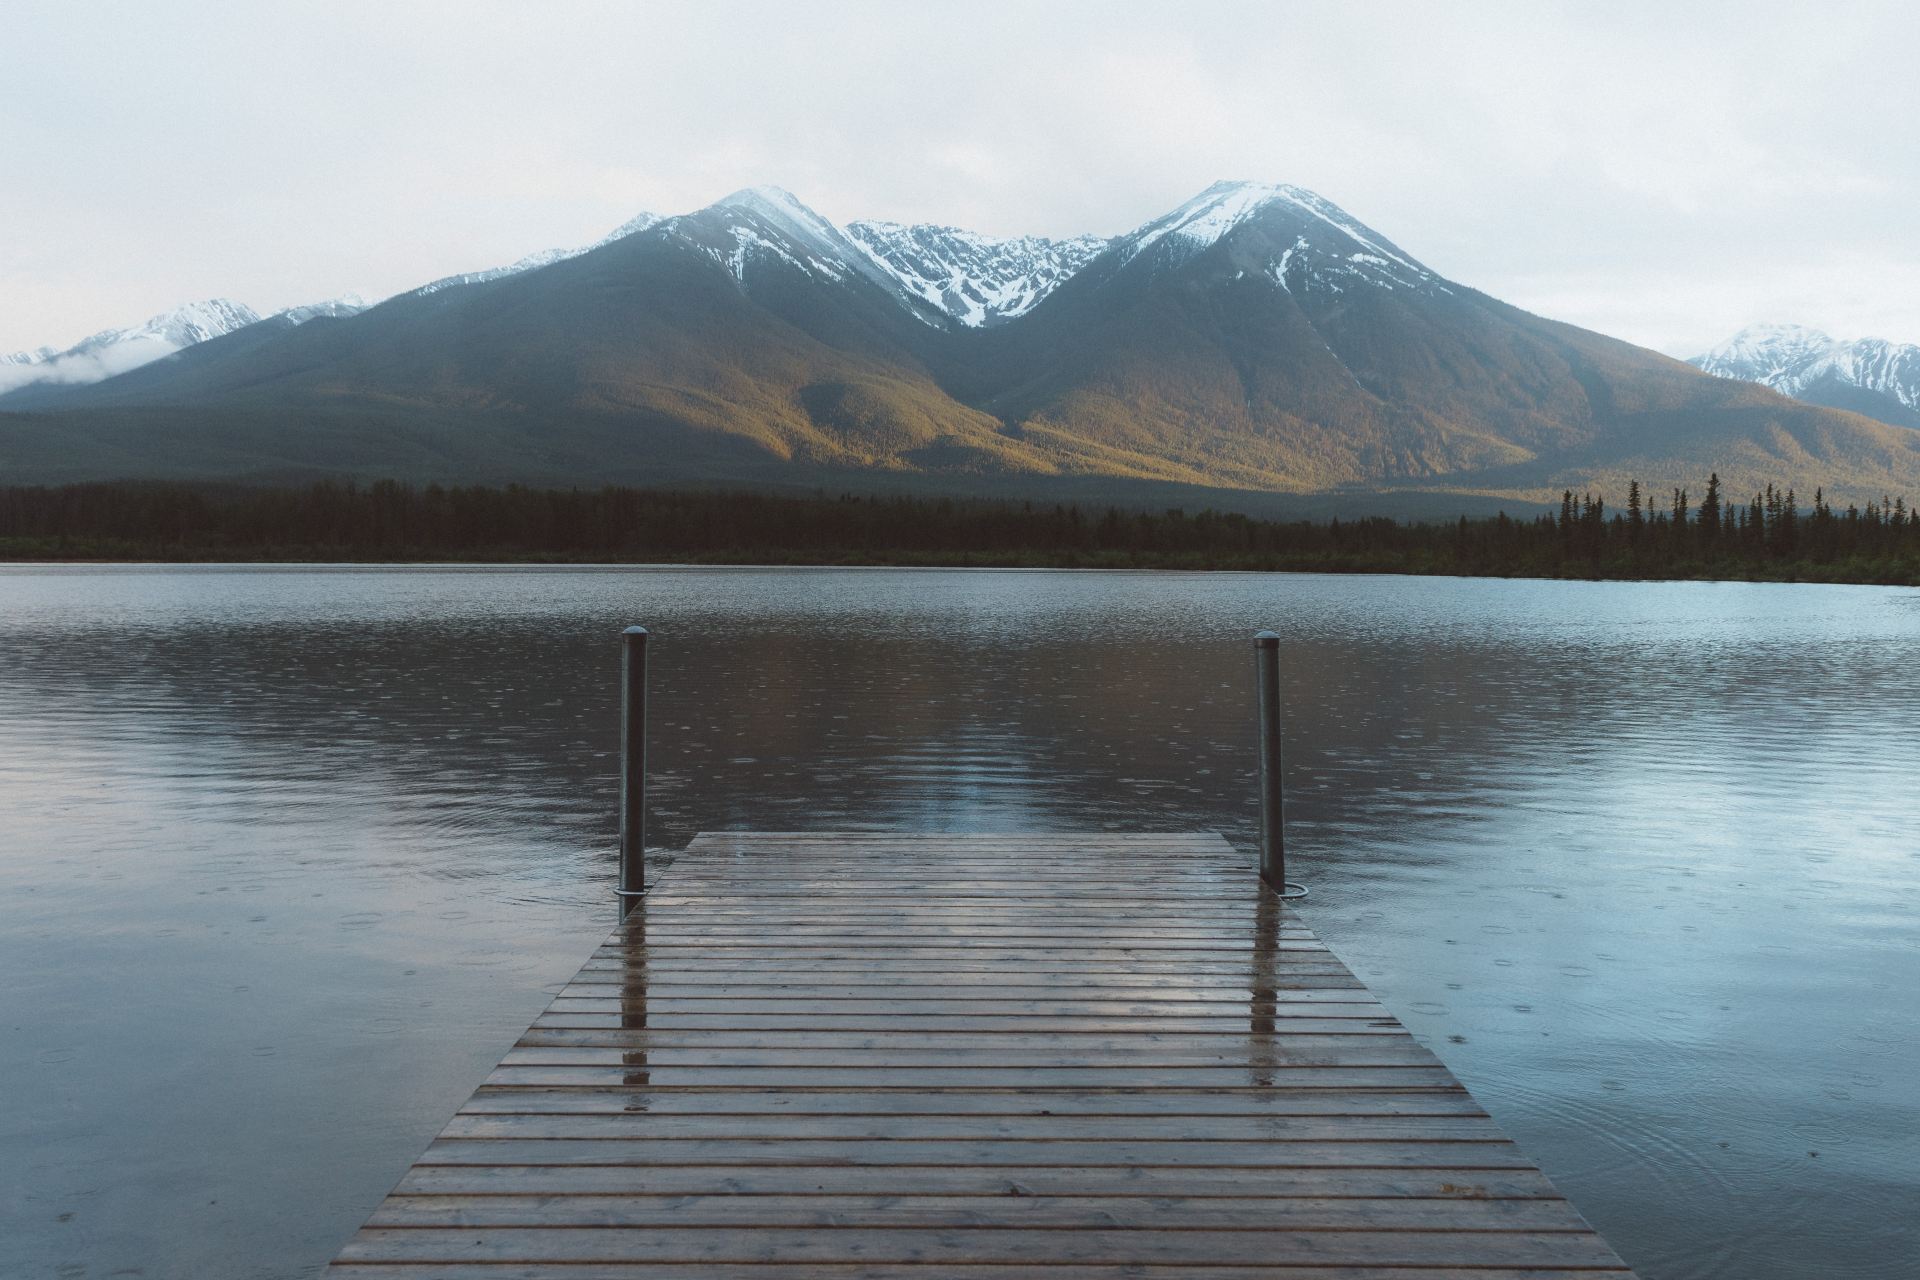 snow-capped mountain at the horizon viewed from lake dock